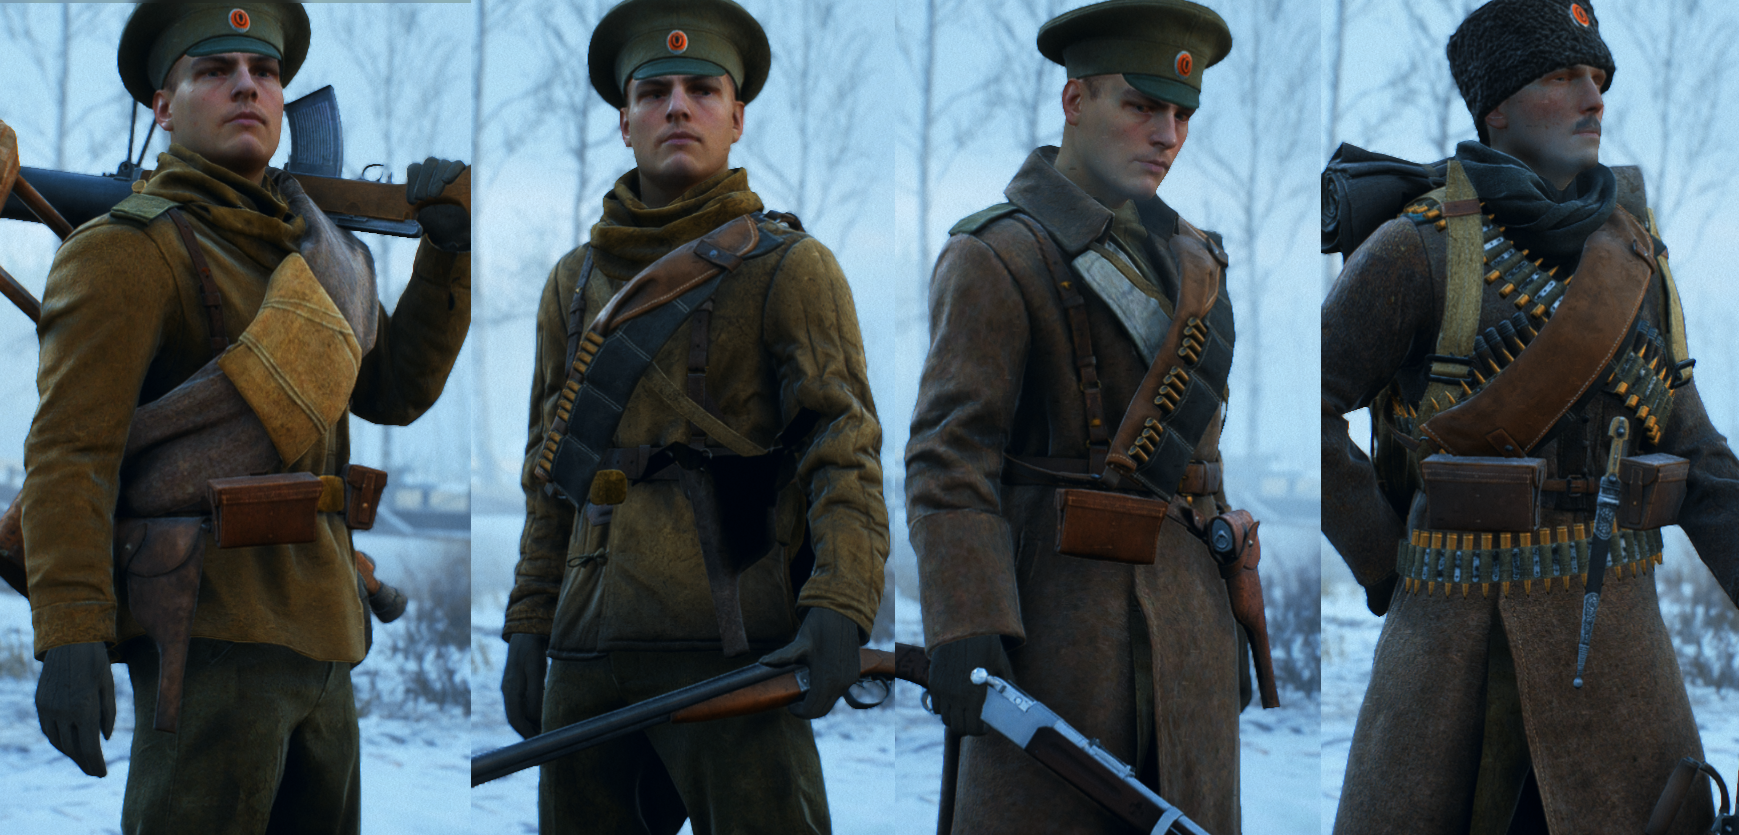 battlefield 1 character png